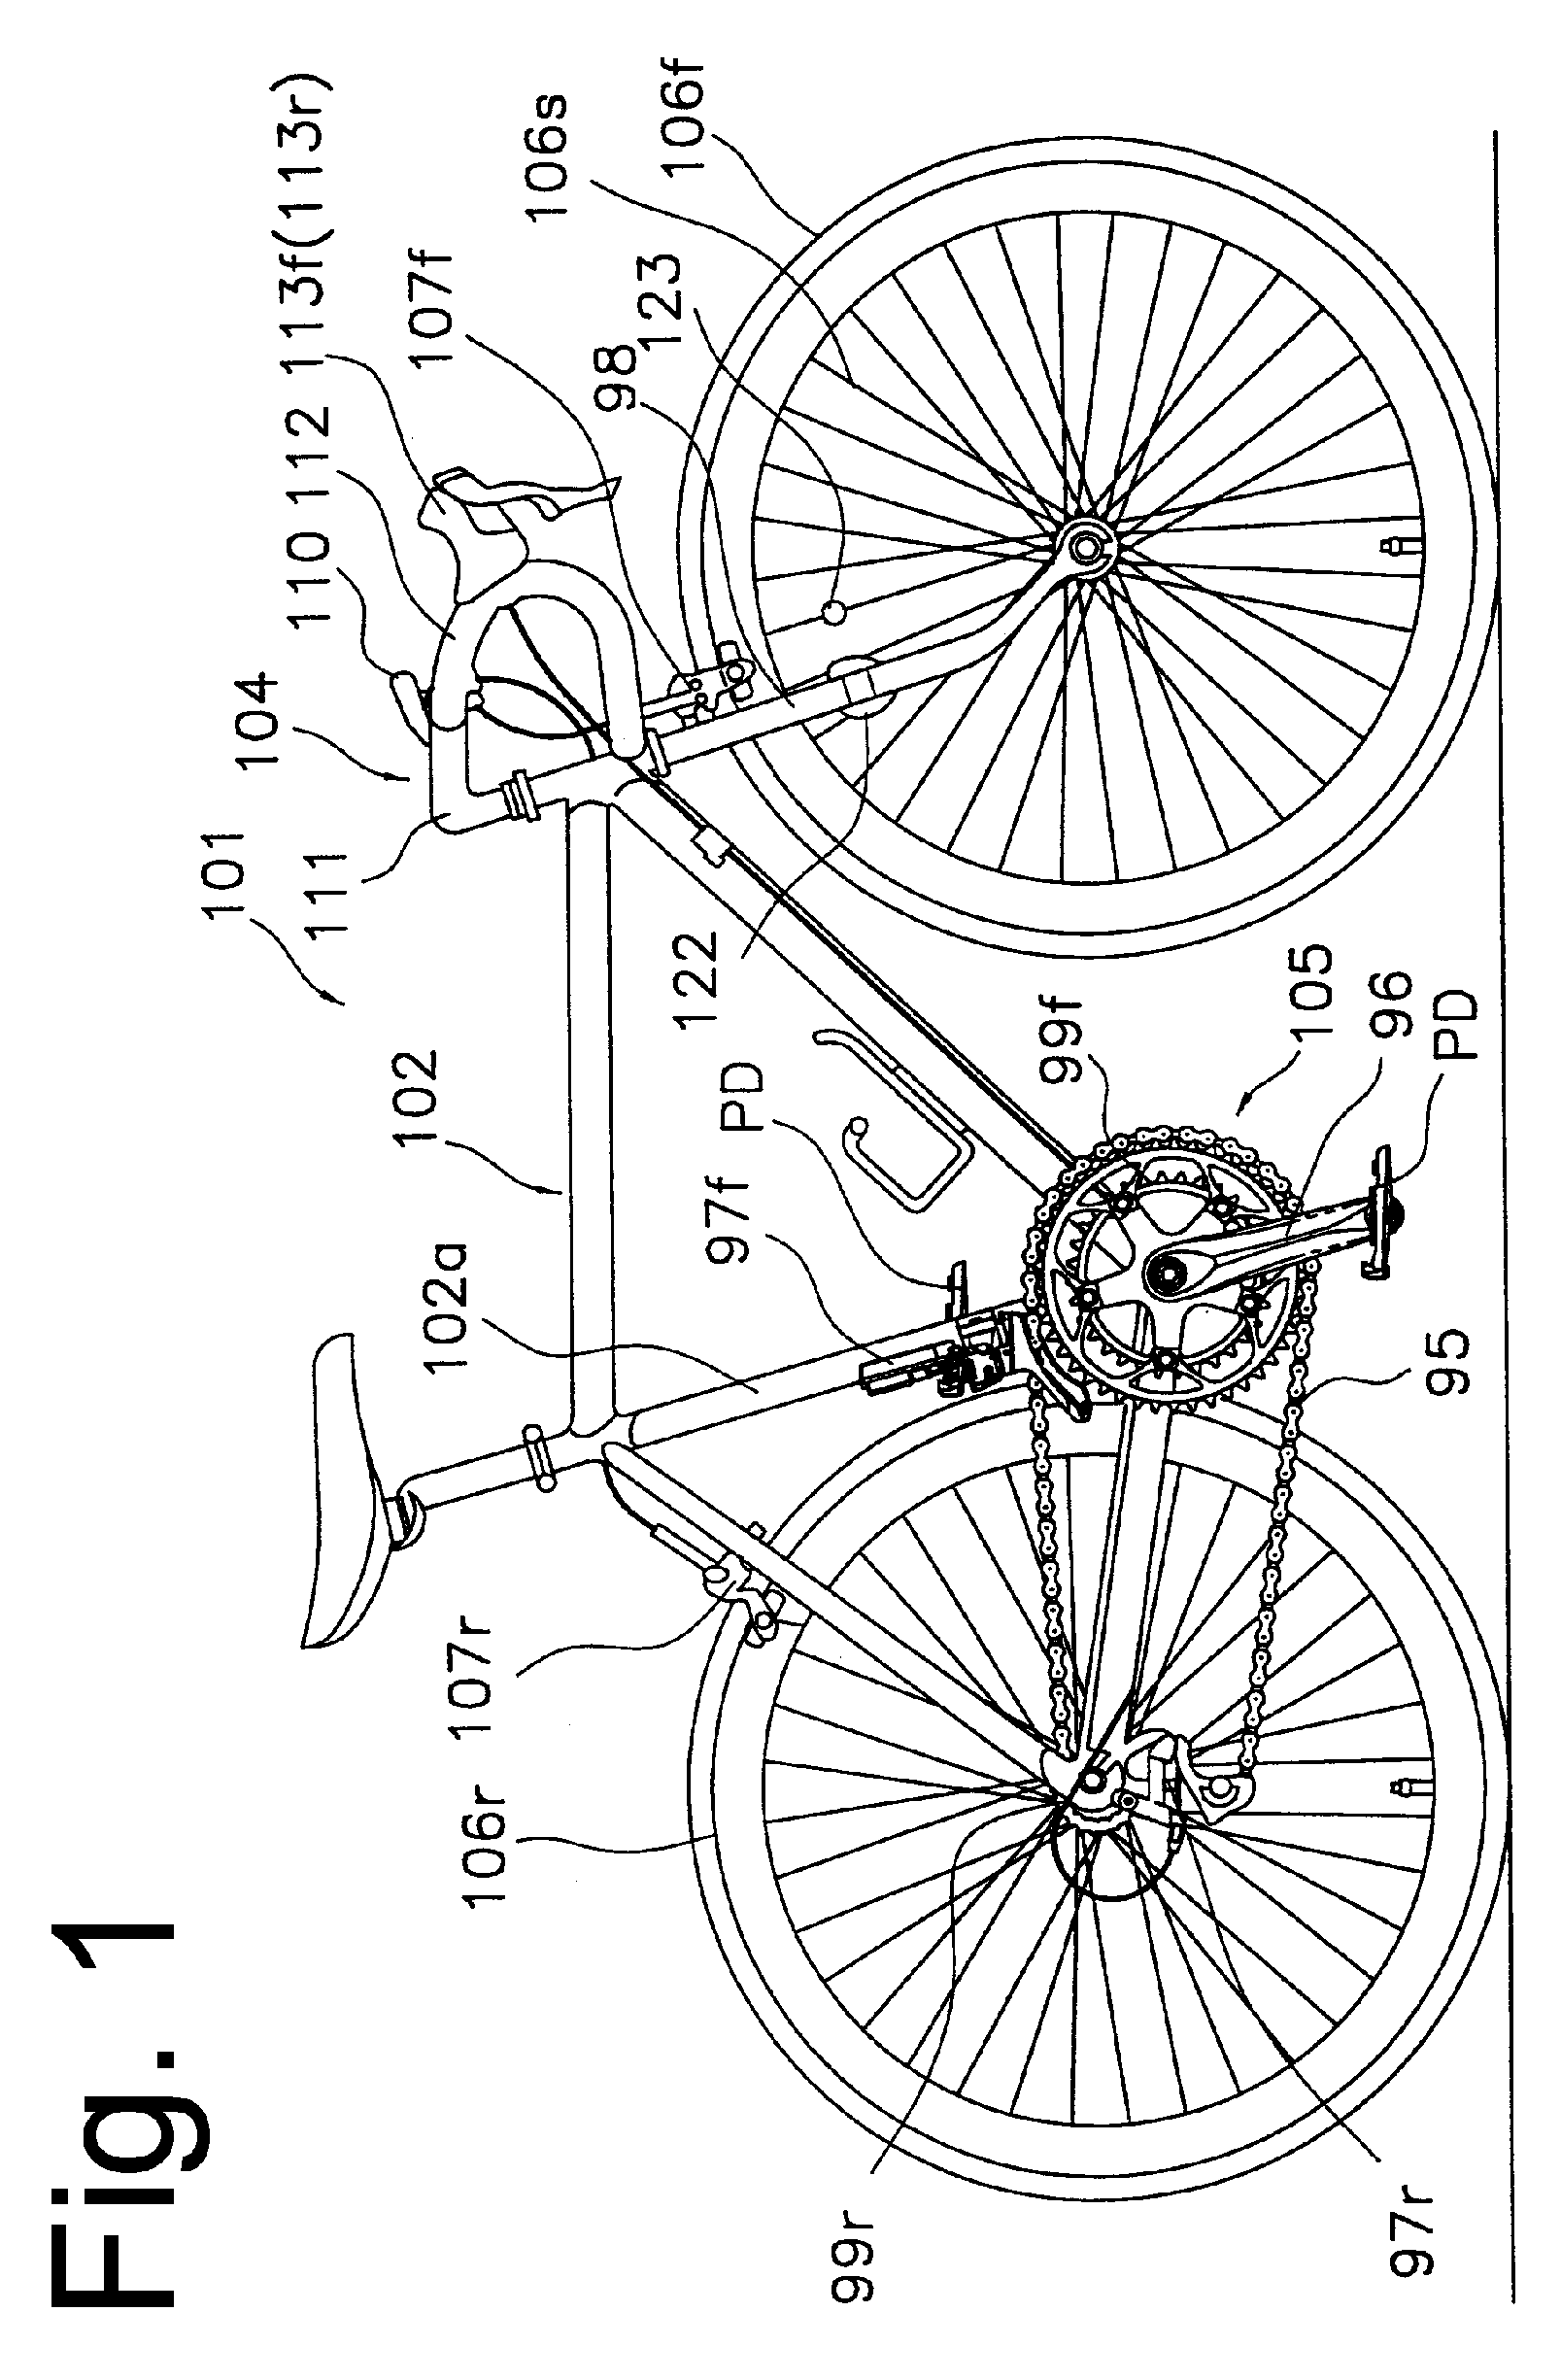 Switch designation apparatus for a bicycle control unit